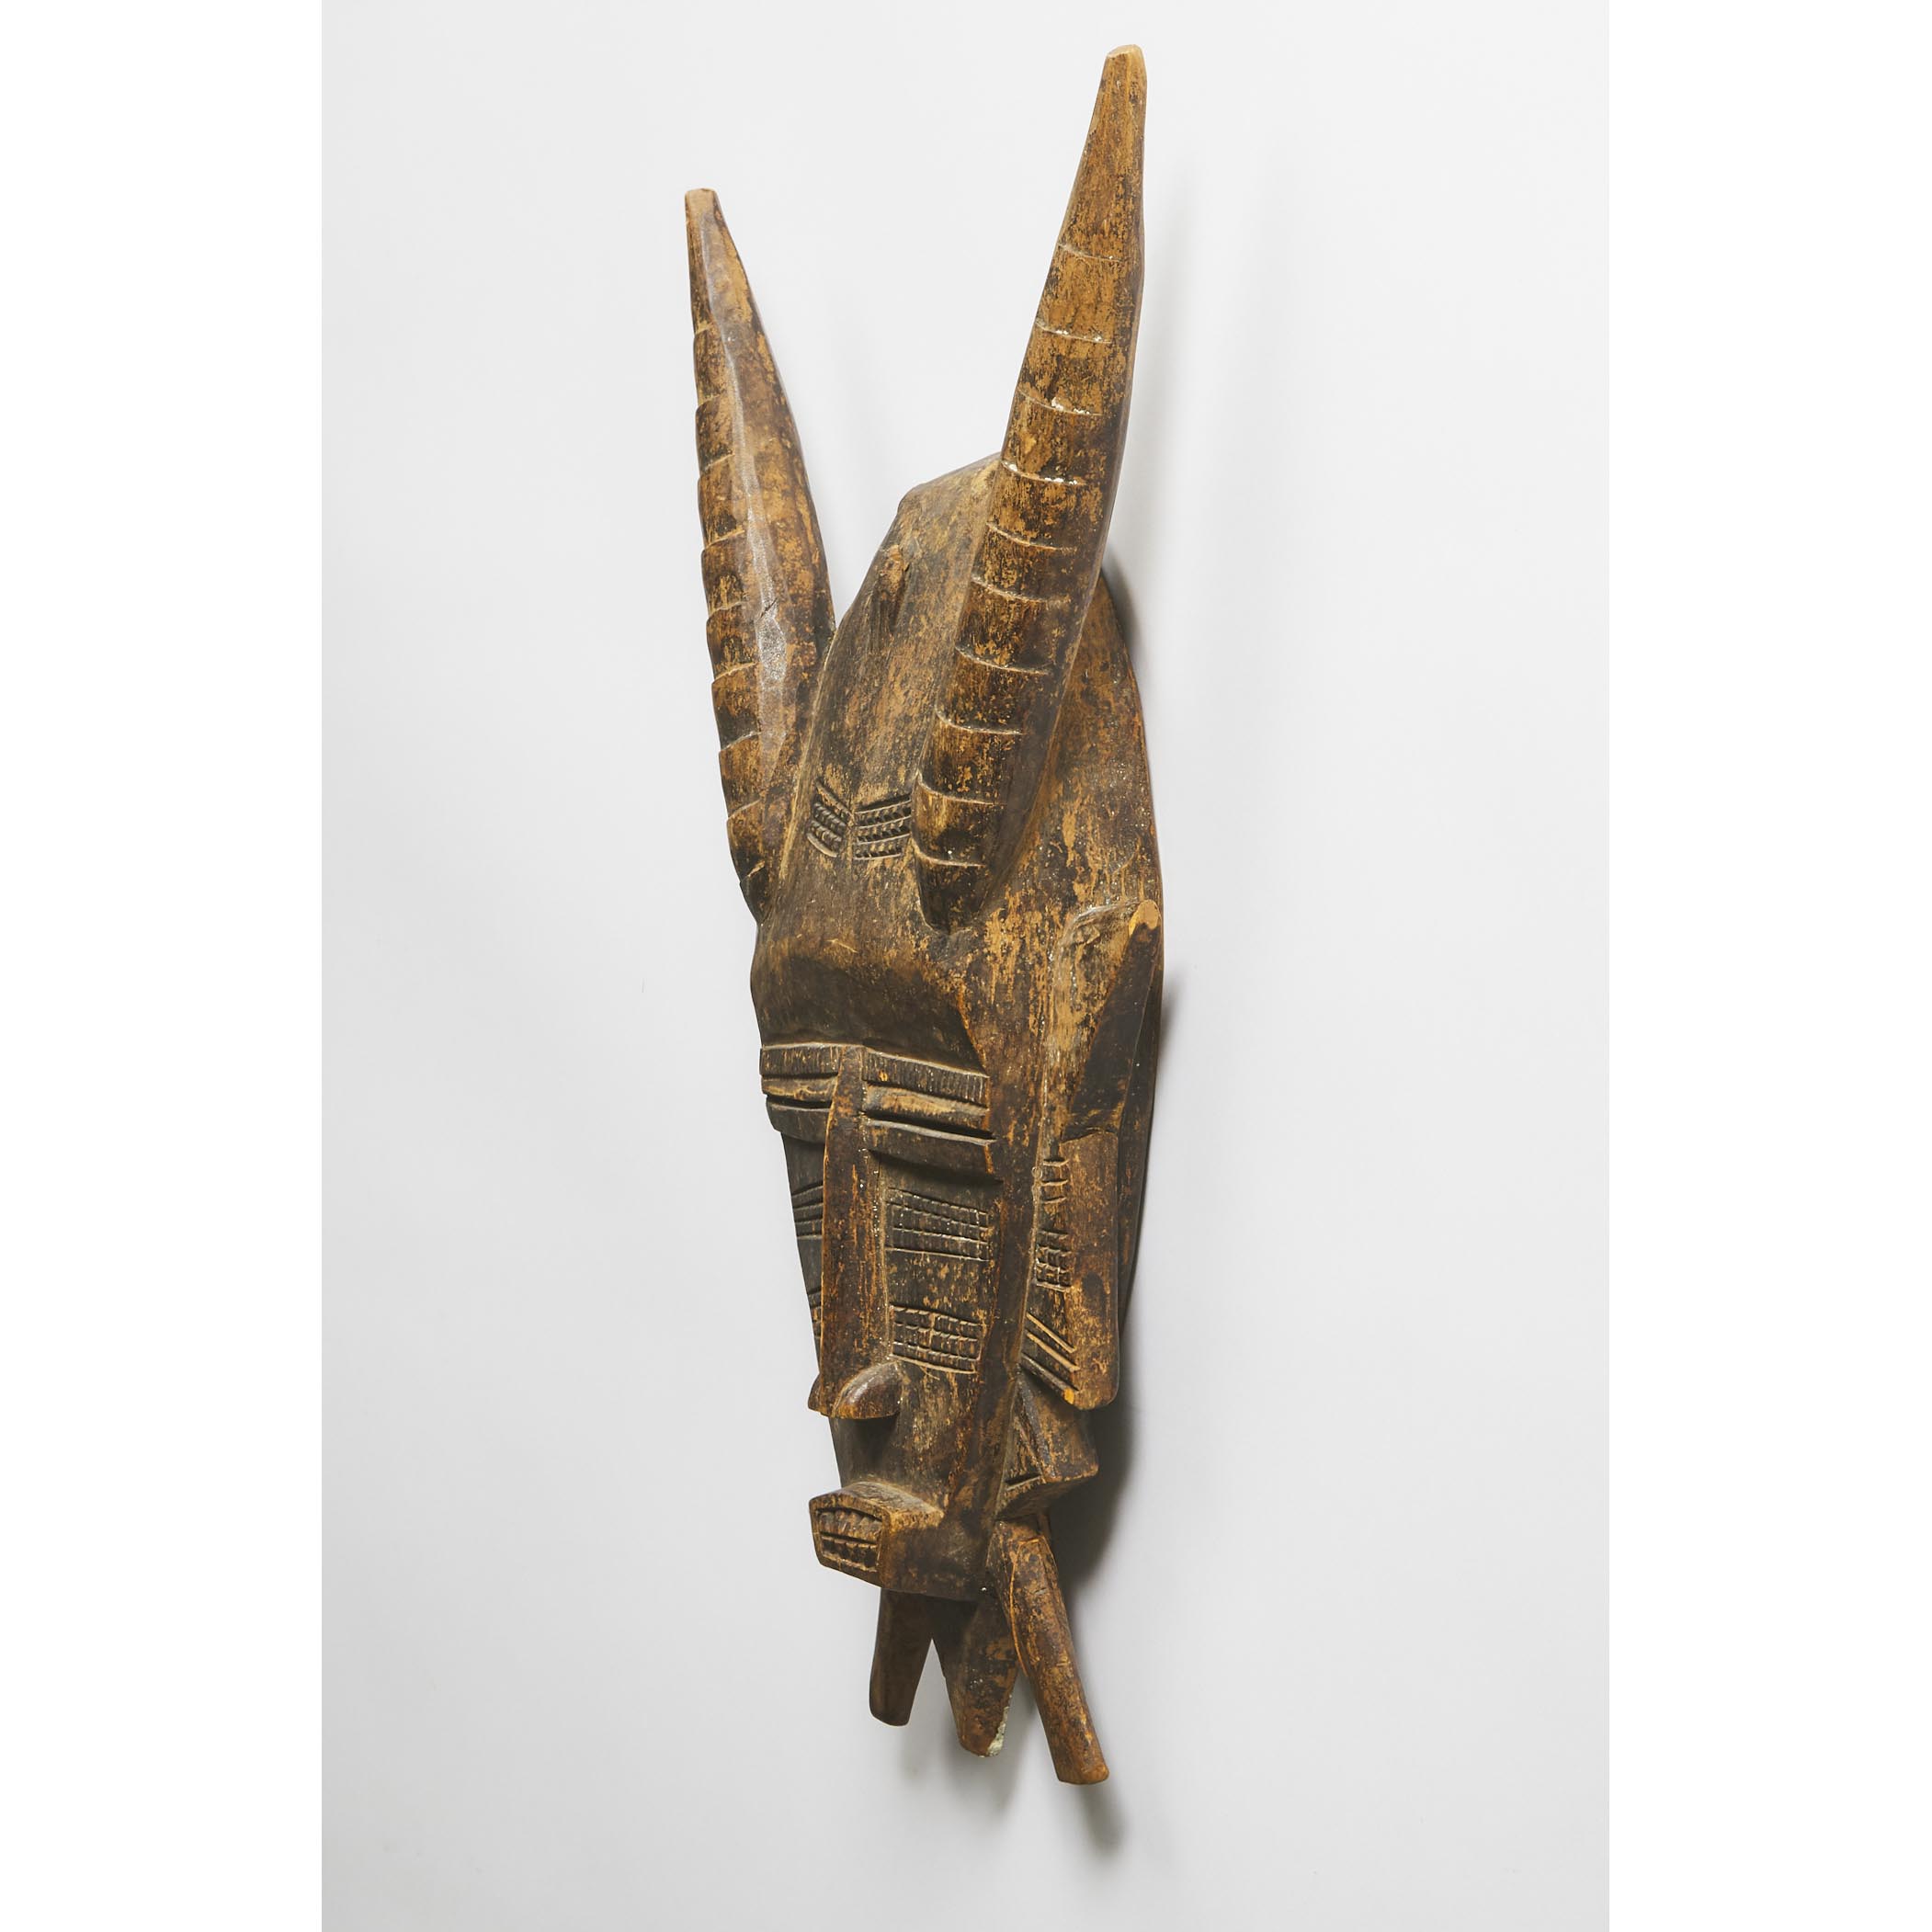 Senufo Kpelie Mask, West Africa, mid to late 20th century